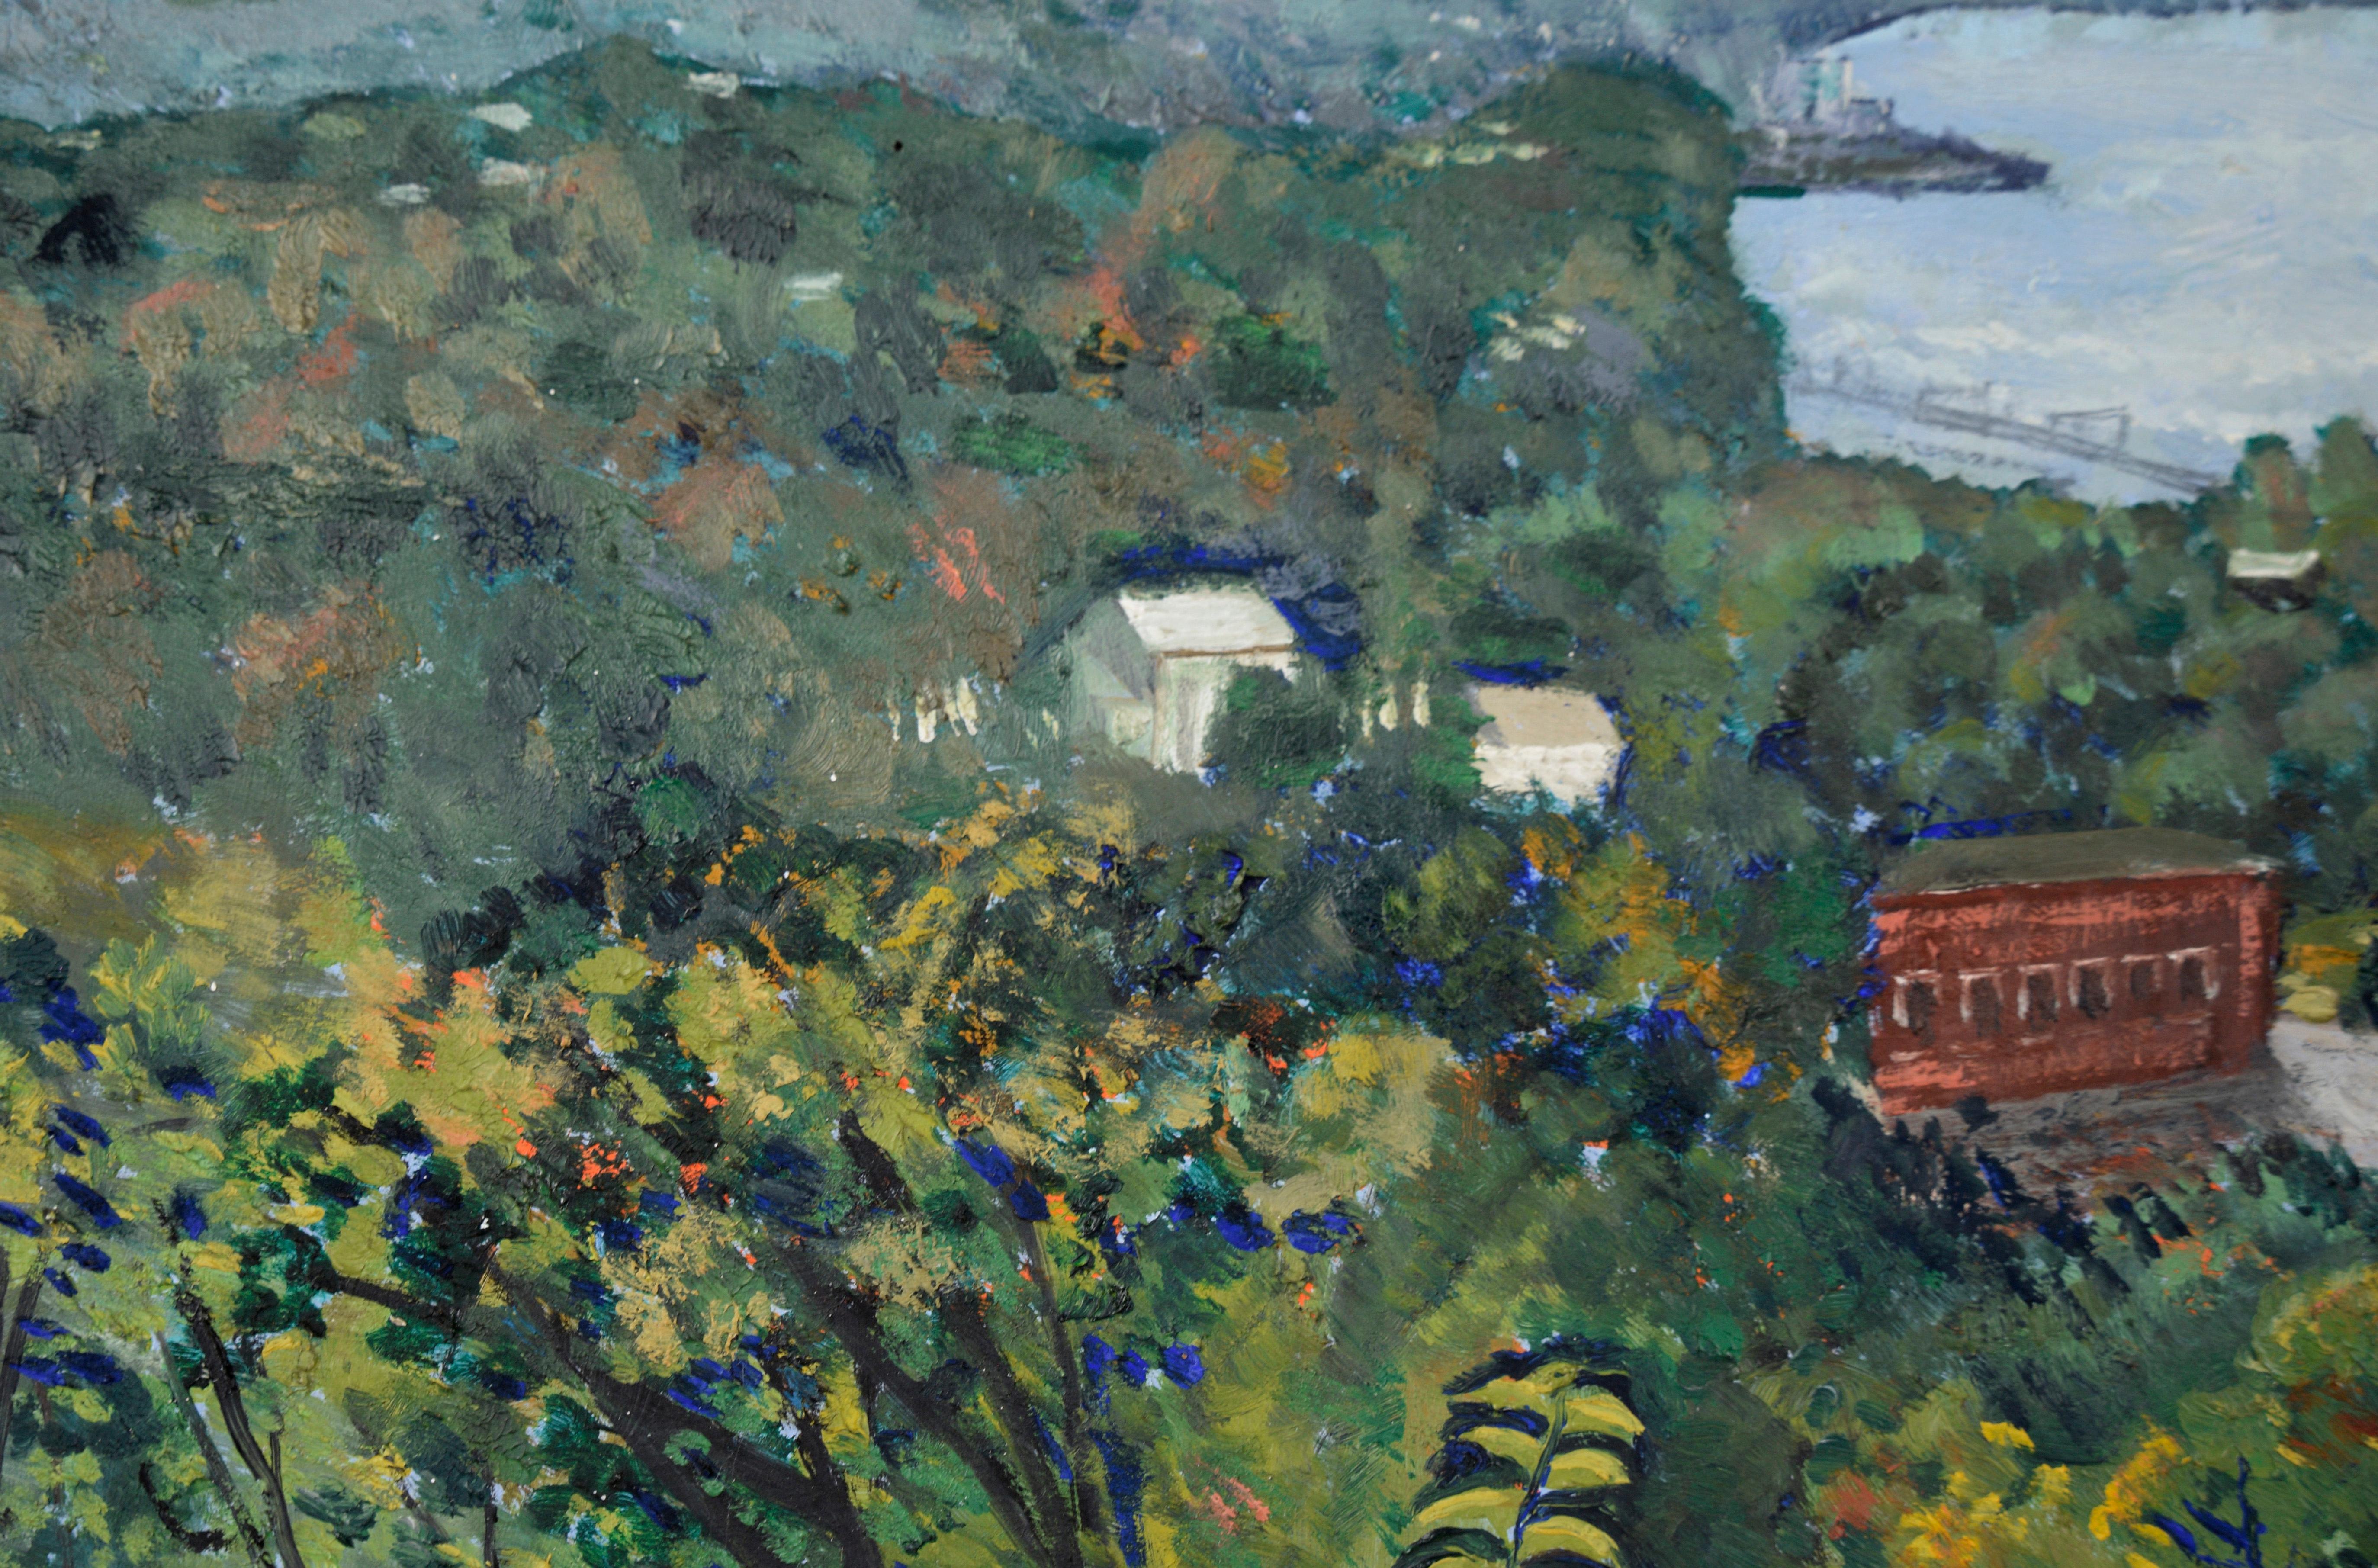 Overlooking the Bay - Coastal Maine Landscape in Oil on Masonite by Lydia 1957 - American Impressionist Painting by Unknown